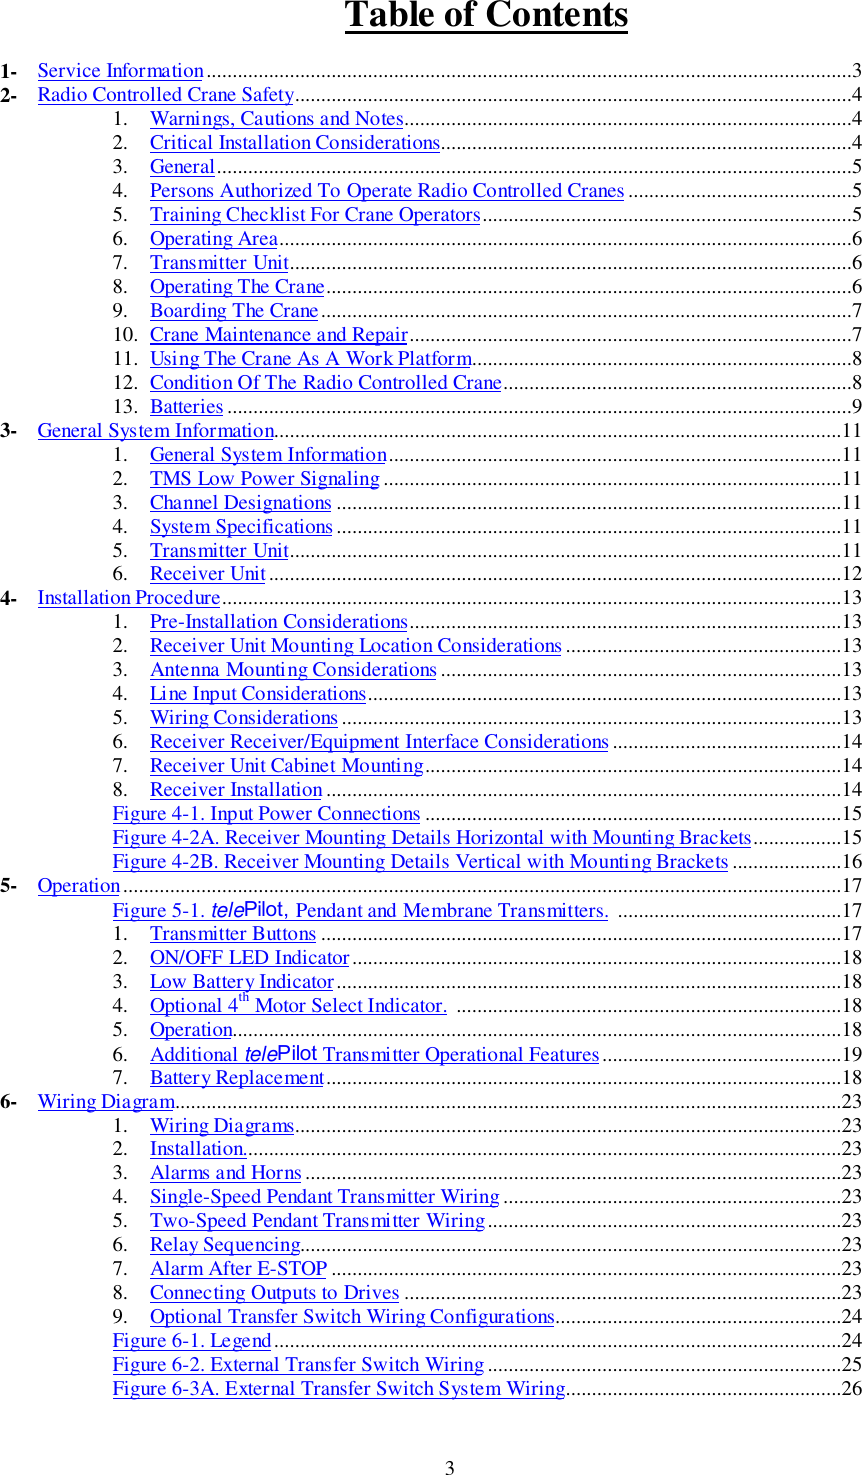 Table of Contents31- Service Information............................................................................................................................32- Radio Controlled Crane Safety...........................................................................................................41. Warnings, Cautions and Notes......................................................................................42. Critical Installation Considerations...............................................................................43. General..........................................................................................................................54. Persons Authorized To Operate Radio Controlled Cranes ...........................................55. Training Checklist For Crane Operators.......................................................................56. Operating Area..............................................................................................................67. Transmitter Unit............................................................................................................68. Operating The Crane.....................................................................................................69. Boarding The Crane......................................................................................................710. Crane Maintenance and Repair.....................................................................................711. Using The Crane As A Work Platform.........................................................................812. Condition Of The Radio Controlled Crane...................................................................813. Batteries ........................................................................................................................93- General System Information.............................................................................................................111. General System Information.......................................................................................112. TMS Low Power Signaling ........................................................................................113. Channel Designations .................................................................................................114. System Specifications .................................................................................................115. Transmitter Unit..........................................................................................................116. Receiver Unit..............................................................................................................124- Installation Procedure.......................................................................................................................131. Pre-Installation Considerations...................................................................................132. Receiver Unit Mounting Location Considerations.....................................................133. Antenna Mounting Considerations .............................................................................134. Line Input Considerations...........................................................................................135. Wiring Considerations ................................................................................................136. Receiver Receiver/Equipment Interface Considerations ............................................147. Receiver Unit Cabinet Mounting................................................................................148. Receiver Installation...................................................................................................14Figure 4-1. Input Power Connections ................................................................................15Figure 4-2A. Receiver Mounting Details Horizontal with Mounting Brackets.................15Figure 4-2B. Receiver Mounting Details Vertical with Mounting Brackets.....................165- Operation..........................................................................................................................................17Figure 5-1. telePilot, Pendant and Membrane Transmitters. ...........................................171. Transmitter Buttons ....................................................................................................172. ON/OFF LED Indicator..............................................................................................183. Low Battery Indicator.................................................................................................184. Optional 4th Motor Select Indicator. ..........................................................................185. Operation.....................................................................................................................186. Additional telePilot Transmitter Operational Features..............................................197. Battery Replacement...................................................................................................186- Wiring Diagram................................................................................................................................231. Wiring Diagrams.........................................................................................................232. Installation...................................................................................................................233. Alarms and Horns .......................................................................................................234. Single-Speed Pendant Transmitter Wiring.................................................................235. Two-Speed Pendant Transmitter Wiring....................................................................236. Relay Sequencing........................................................................................................237. Alarm After E-STOP ..................................................................................................238. Connecting Outputs to Drives ....................................................................................239. Optional Transfer Switch Wiring Configurations.......................................................24Figure 6-1. Legend.............................................................................................................24Figure 6-2. External Transfer Switch Wiring ....................................................................25Figure 6-3A. External Transfer Switch System Wiring.....................................................26